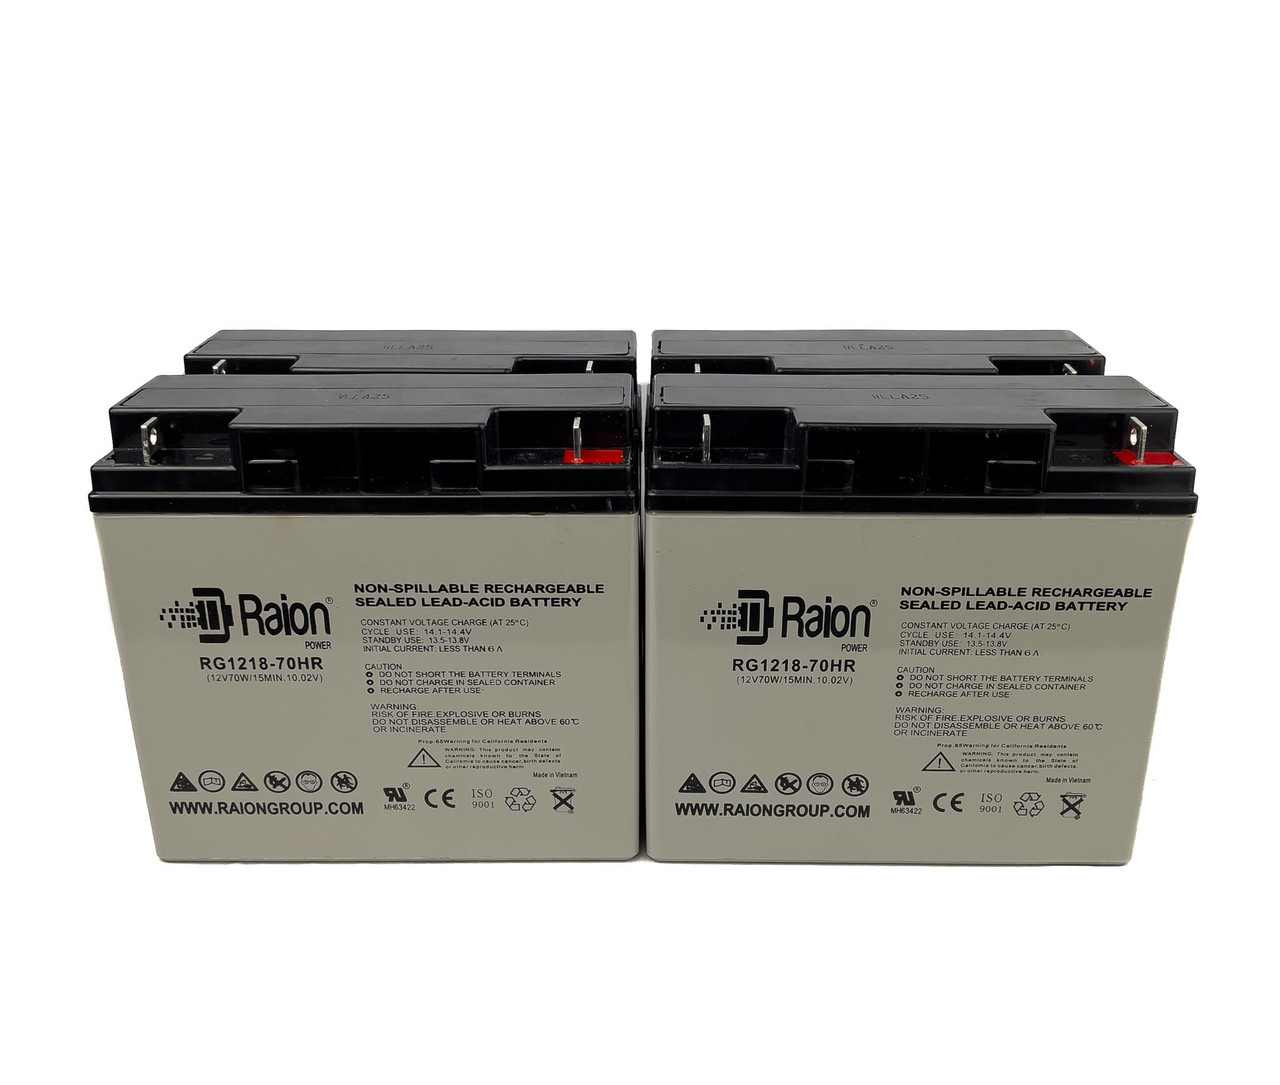 Raion Power RG1218-70HR 12V 18Ah Replacement UPS Battery for Deltec PRA 2000 - 4 Pack